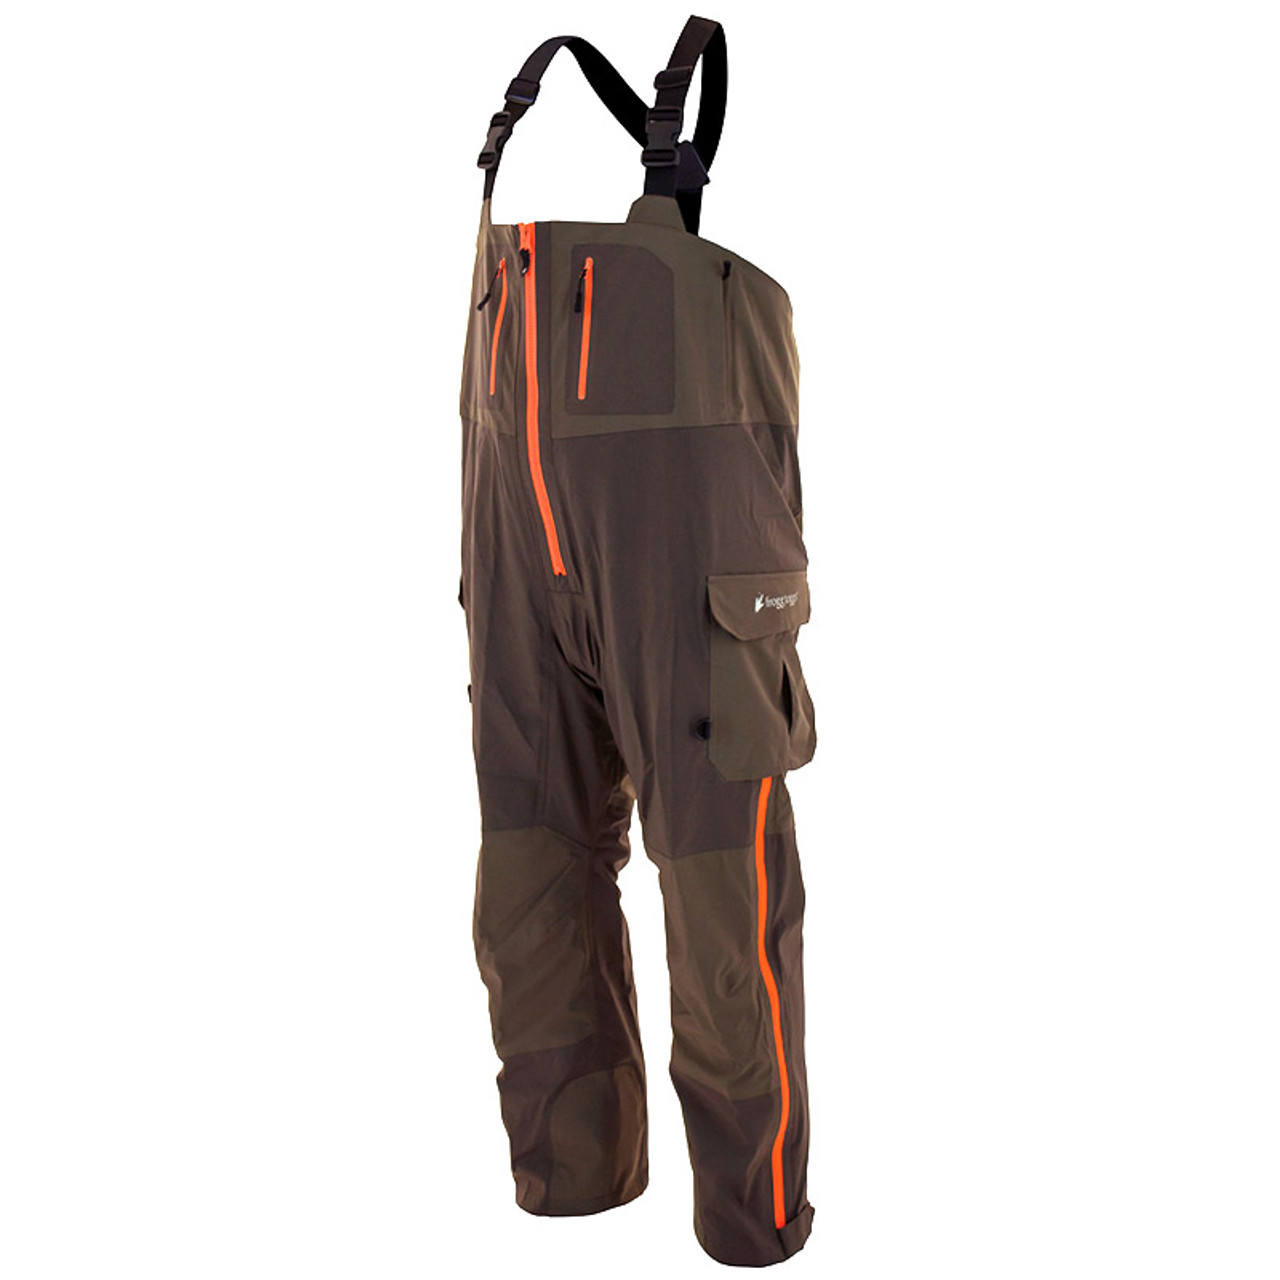 Pilot II Guide Bibs Taupe/Stone Rain Suit by Frogg Toggs